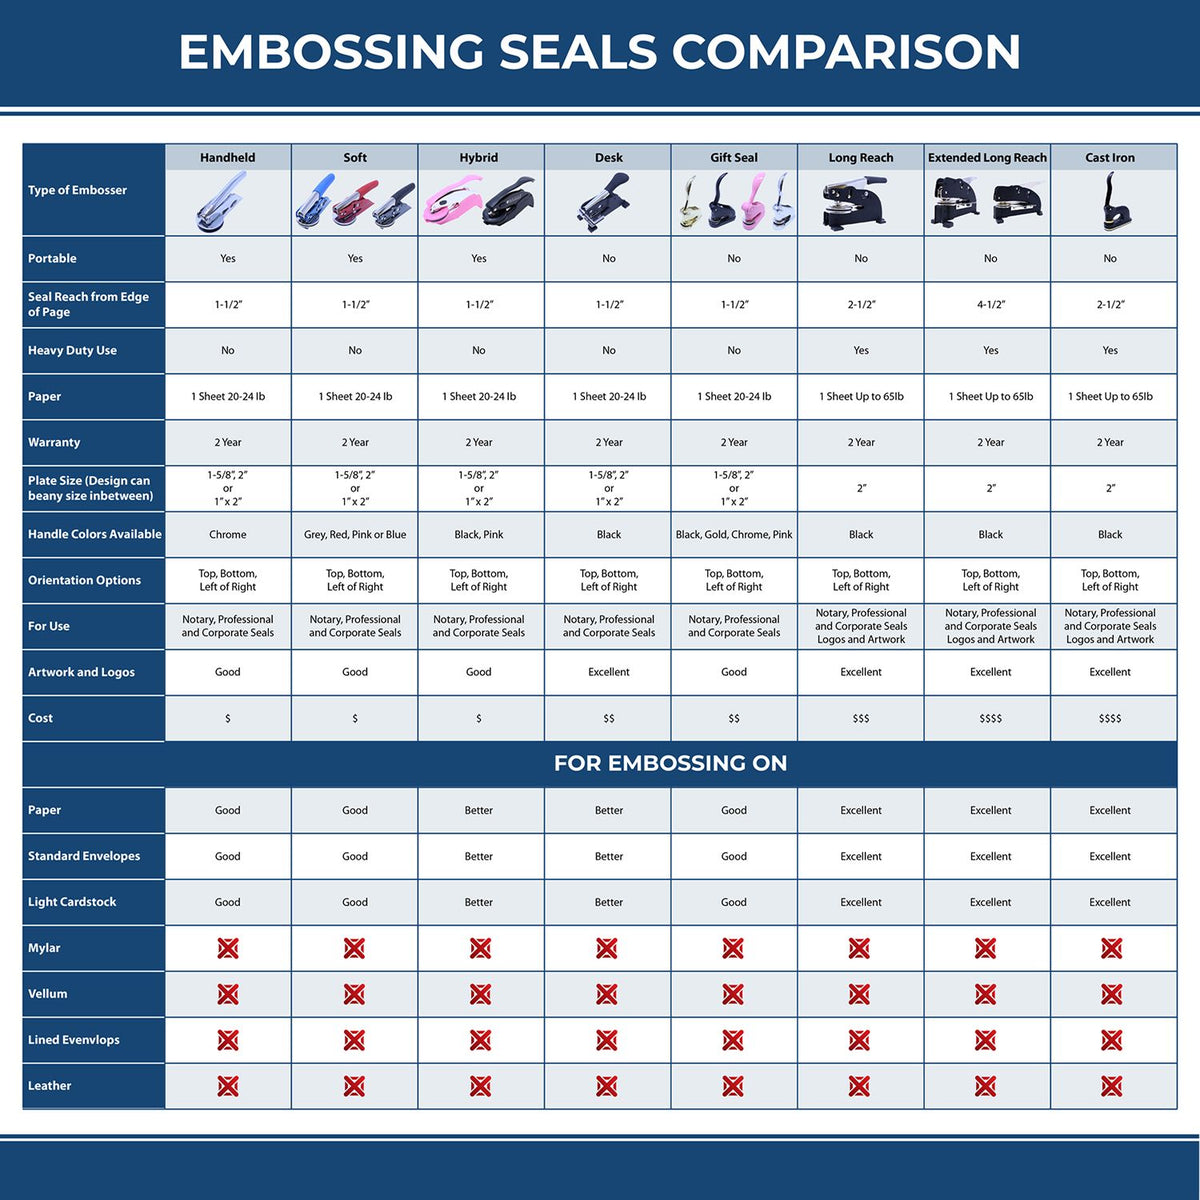 A comparison chart for the different types of mount models available for the Heavy Duty Cast Iron Pennsylvania Geologist Seal Embosser